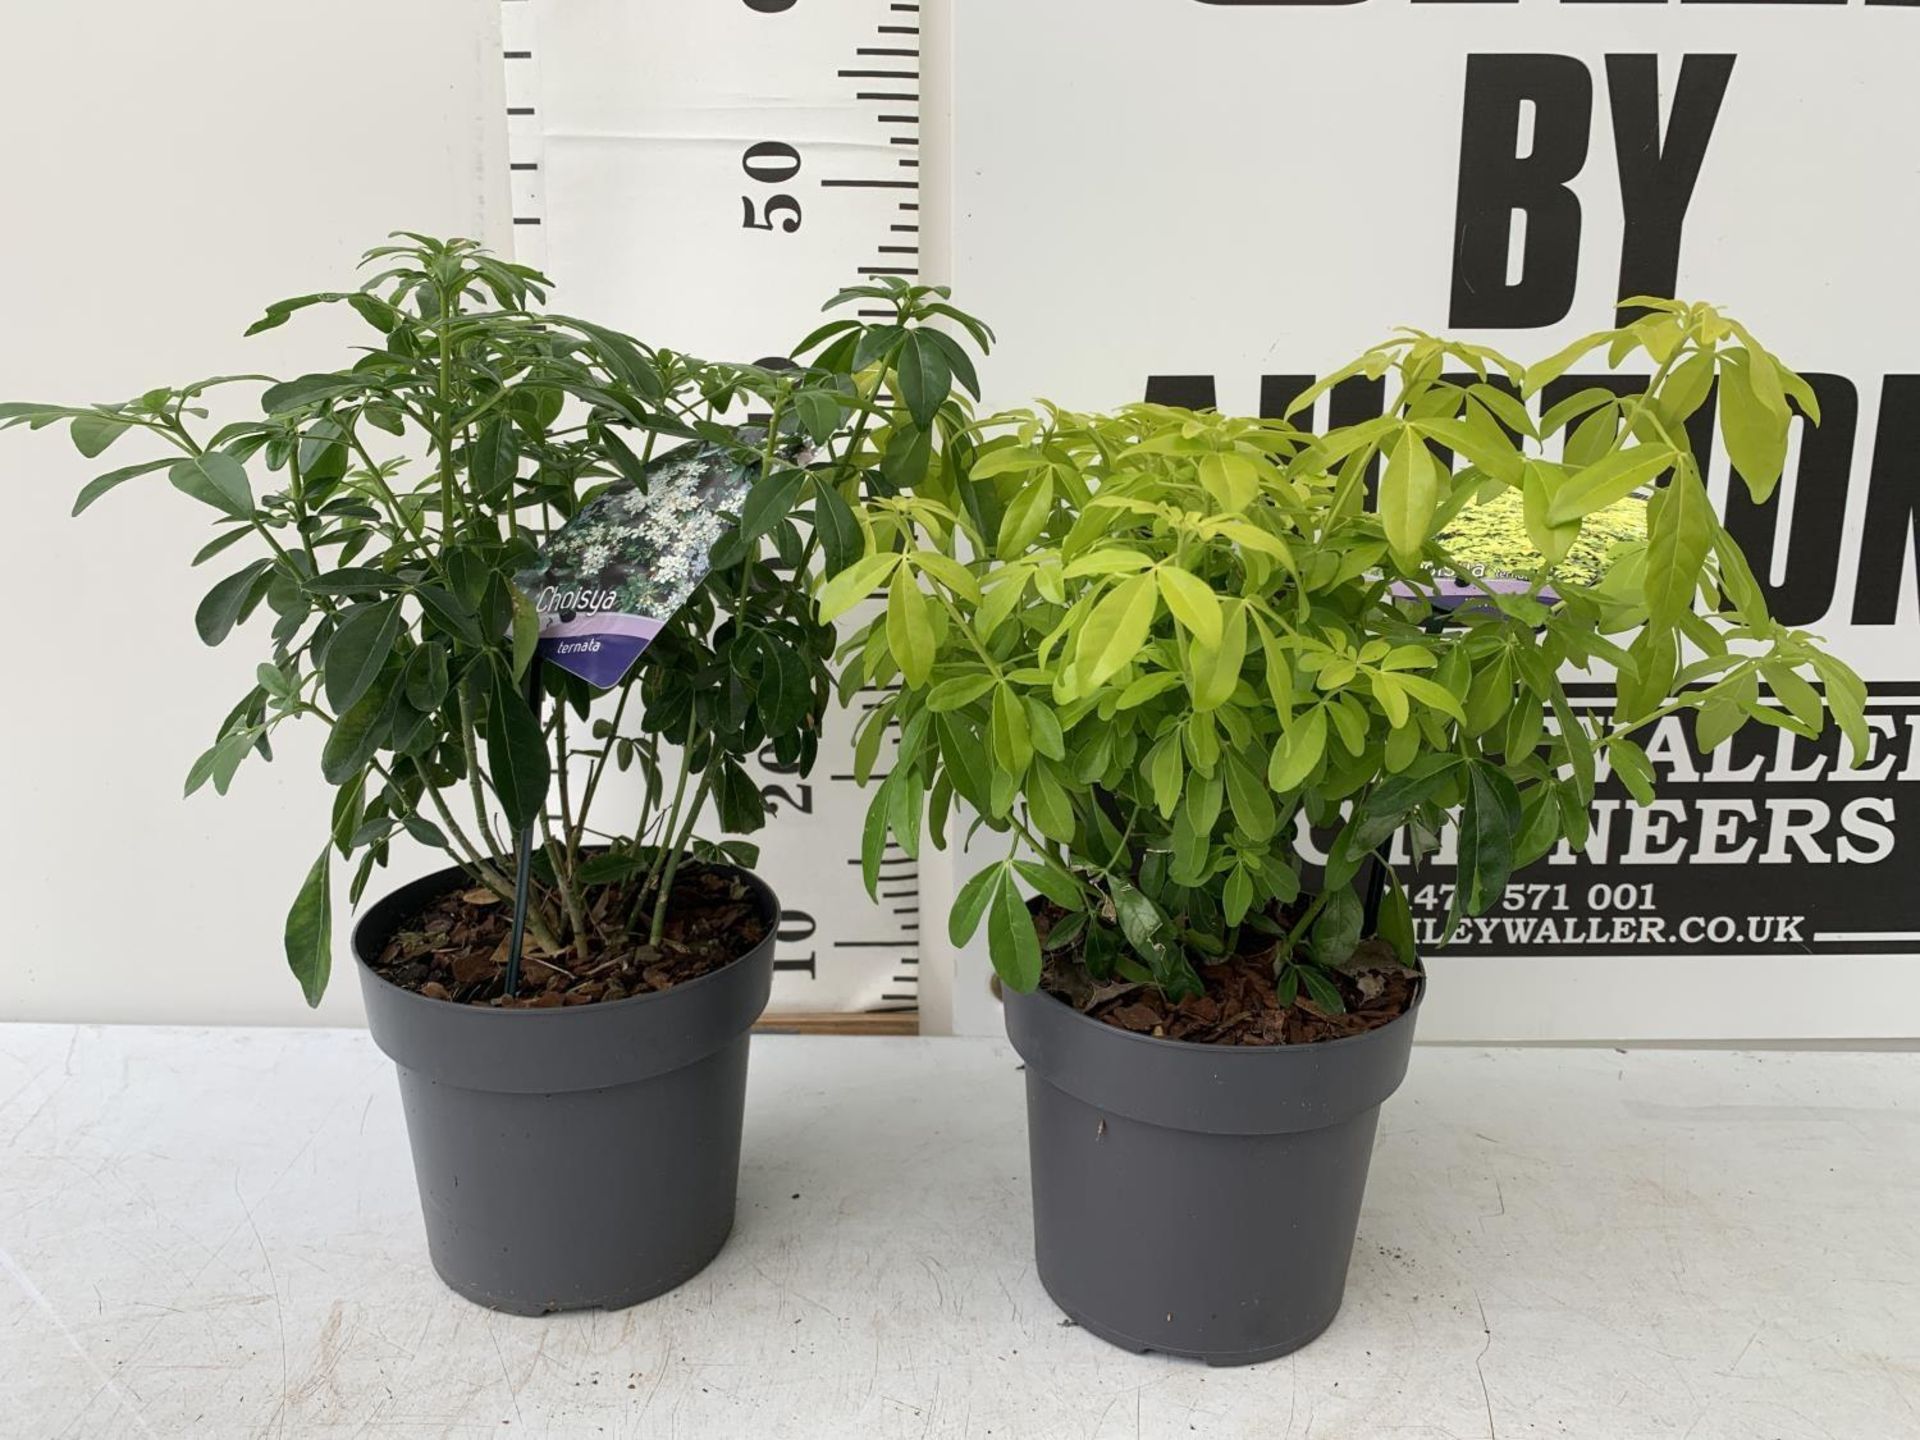 TWO VARIETIES OF CHOISYA TERNATA PLANTS 'BRICA' APPROX 45CM IN HEIGHT IN 2 LTR POTS PLUS VAT TO BE